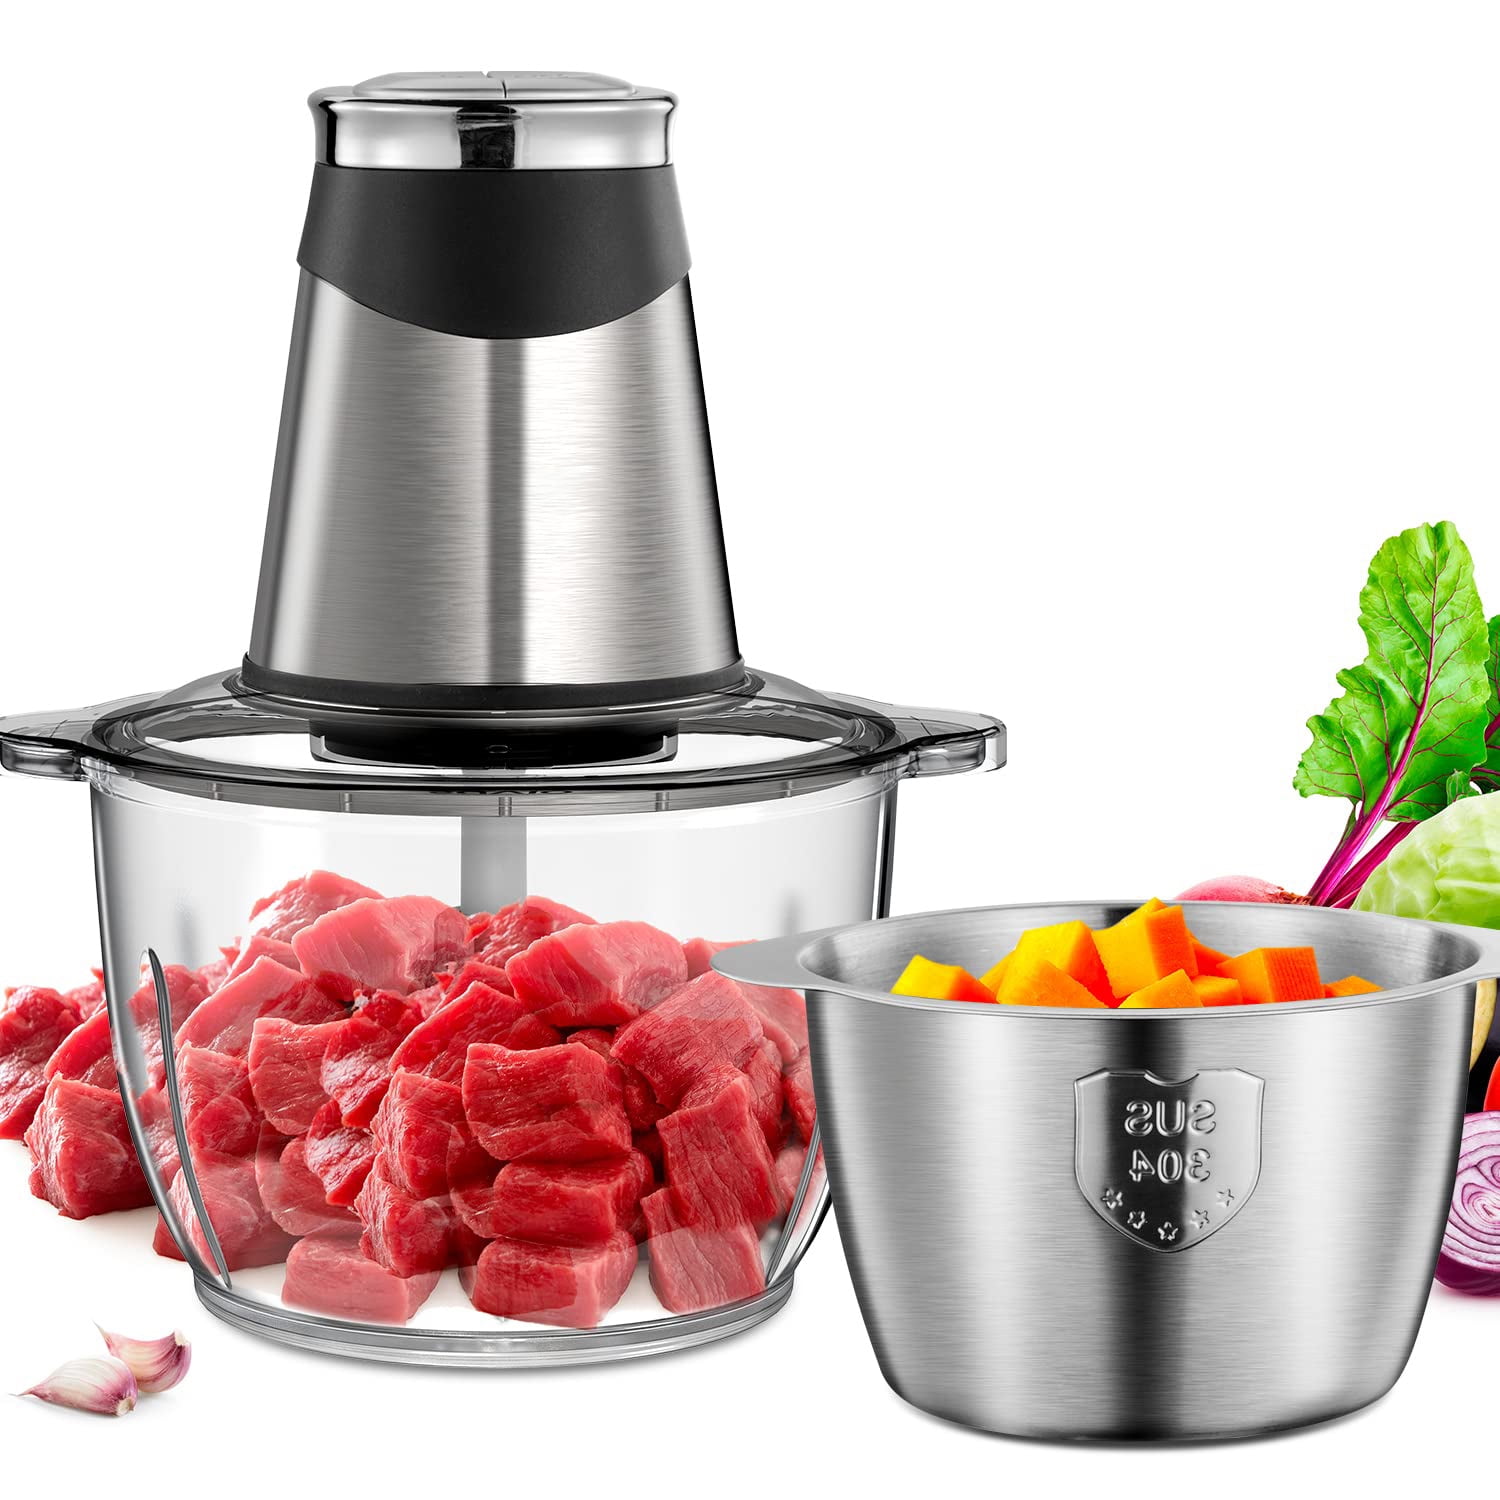 Qinkada Meat Grinder with 2 Stainless Steel Bowls, 500W Electric Food Processors, 3 Speed, 4 Bi-Level Bladesand Spatula for Baby Food, Meat, Onion, Ve